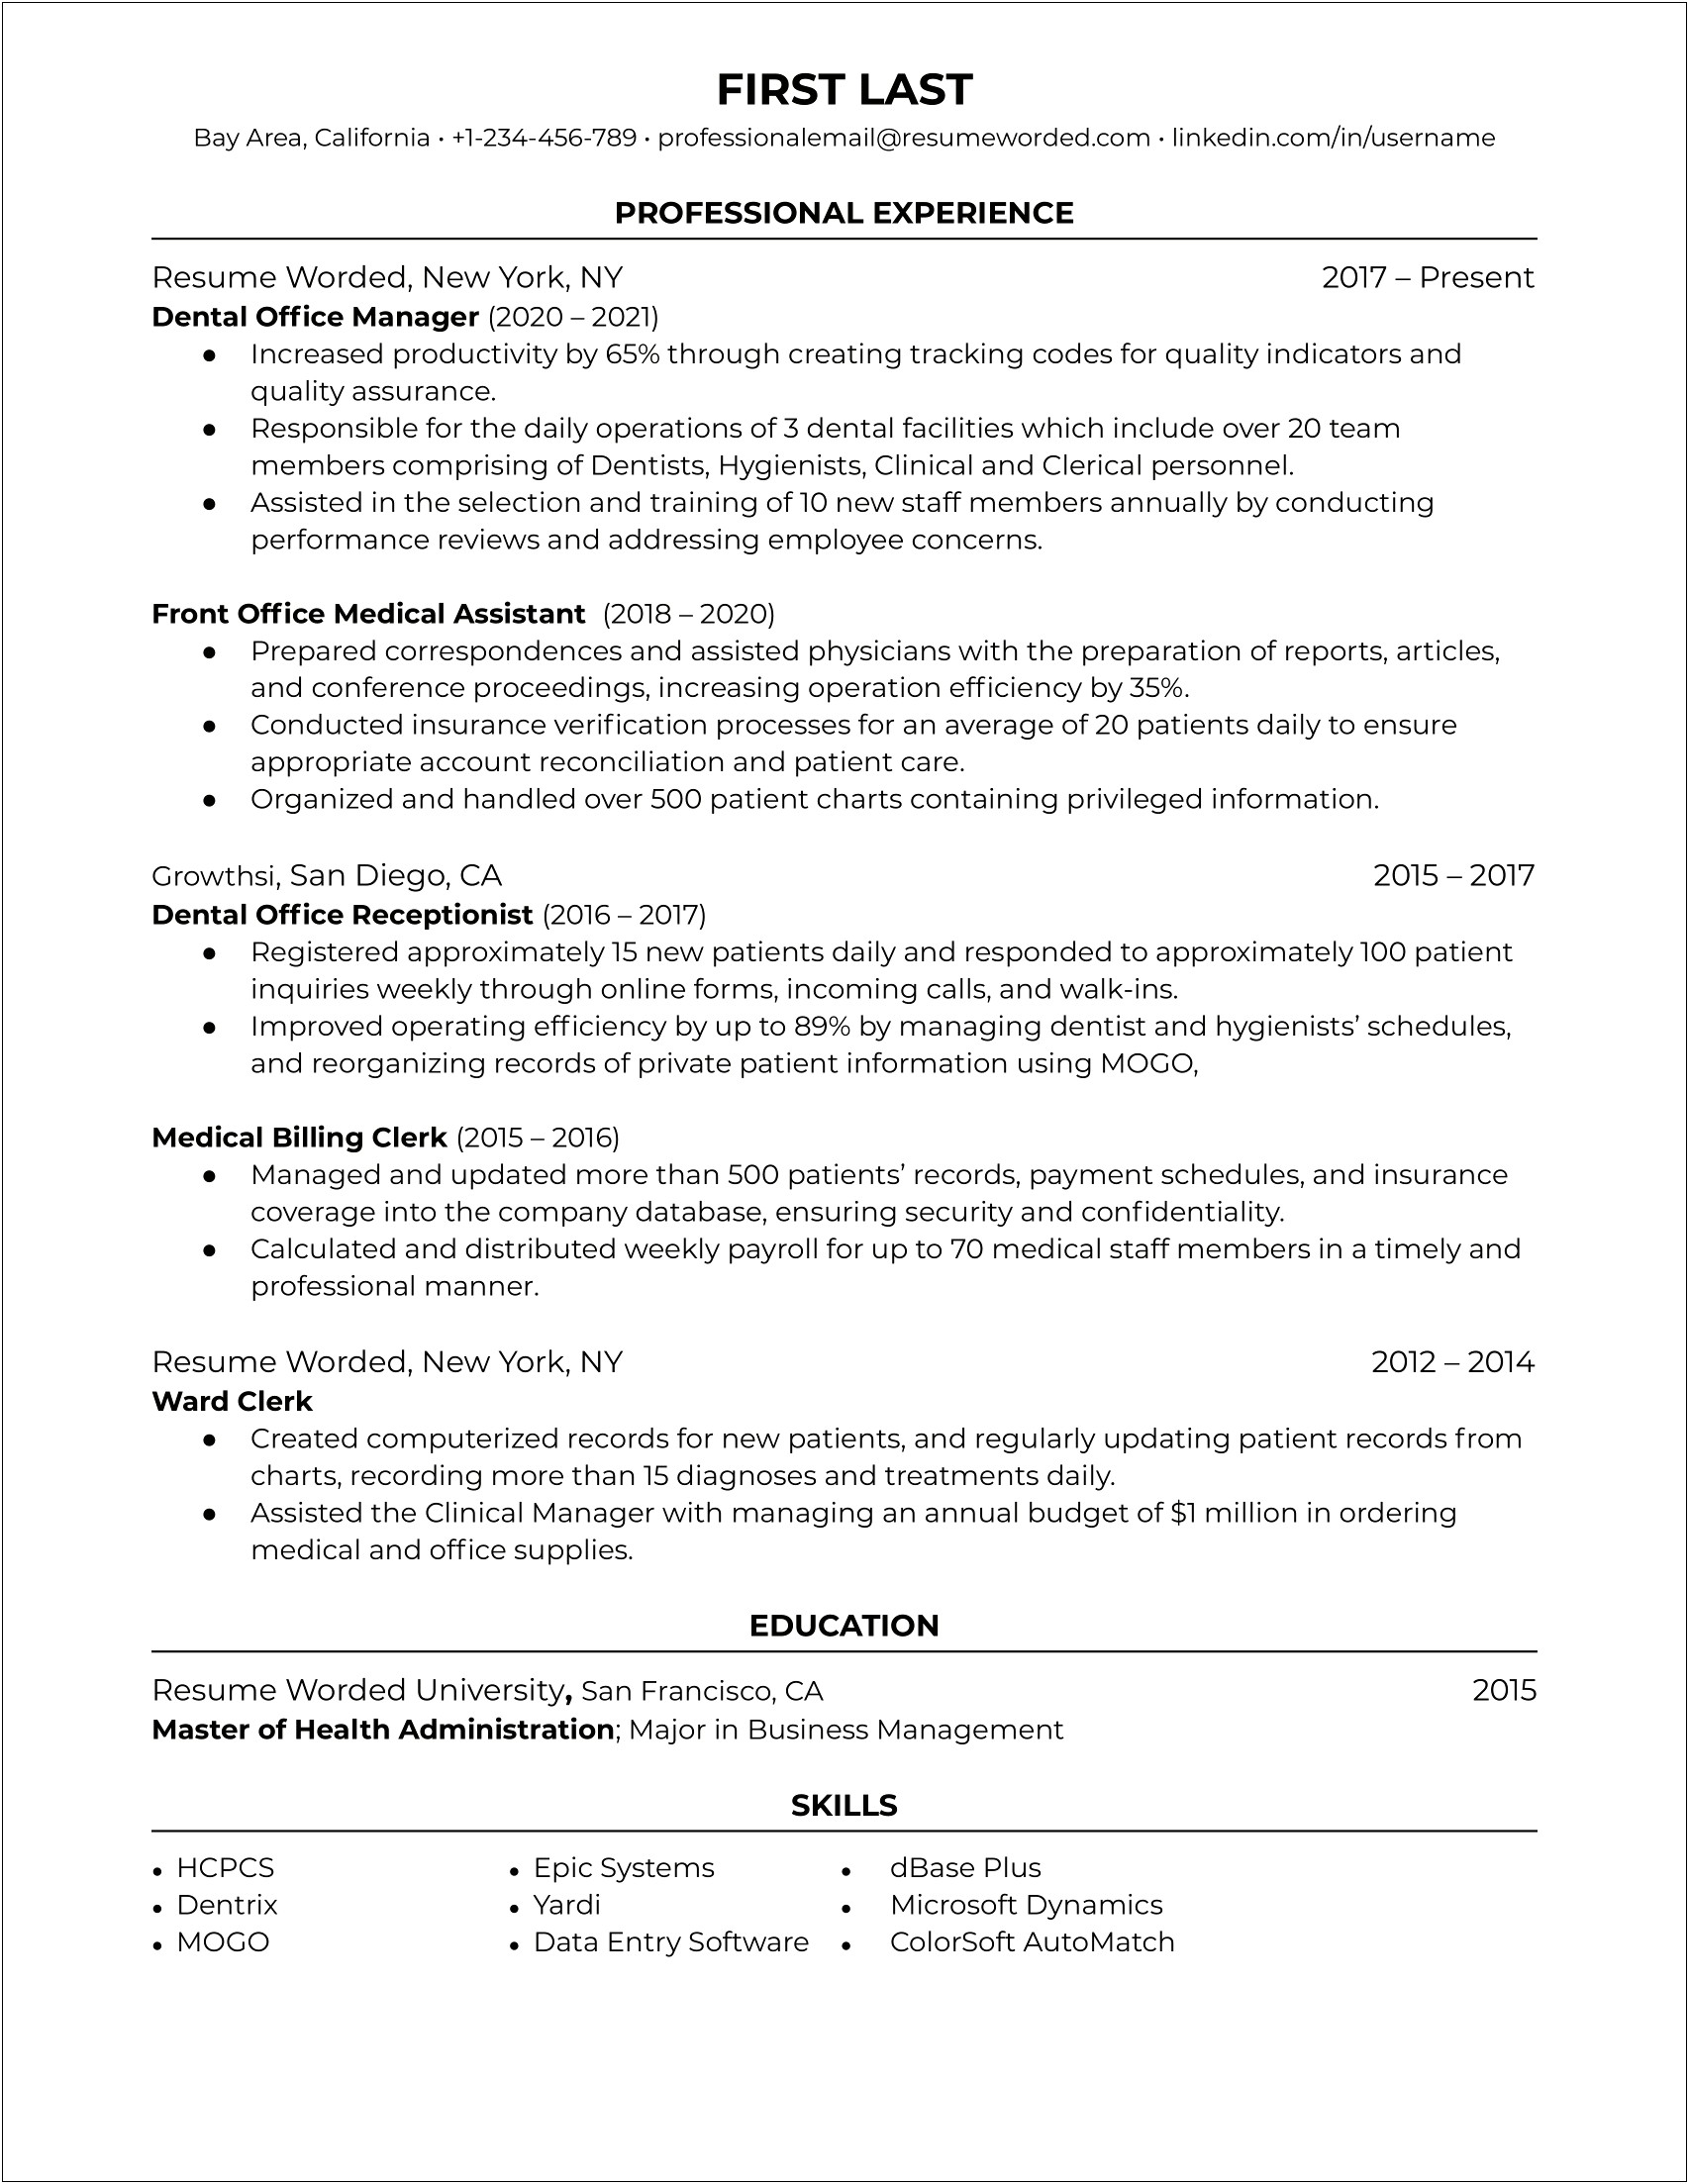 Sample Resume For Front Office Coordinator